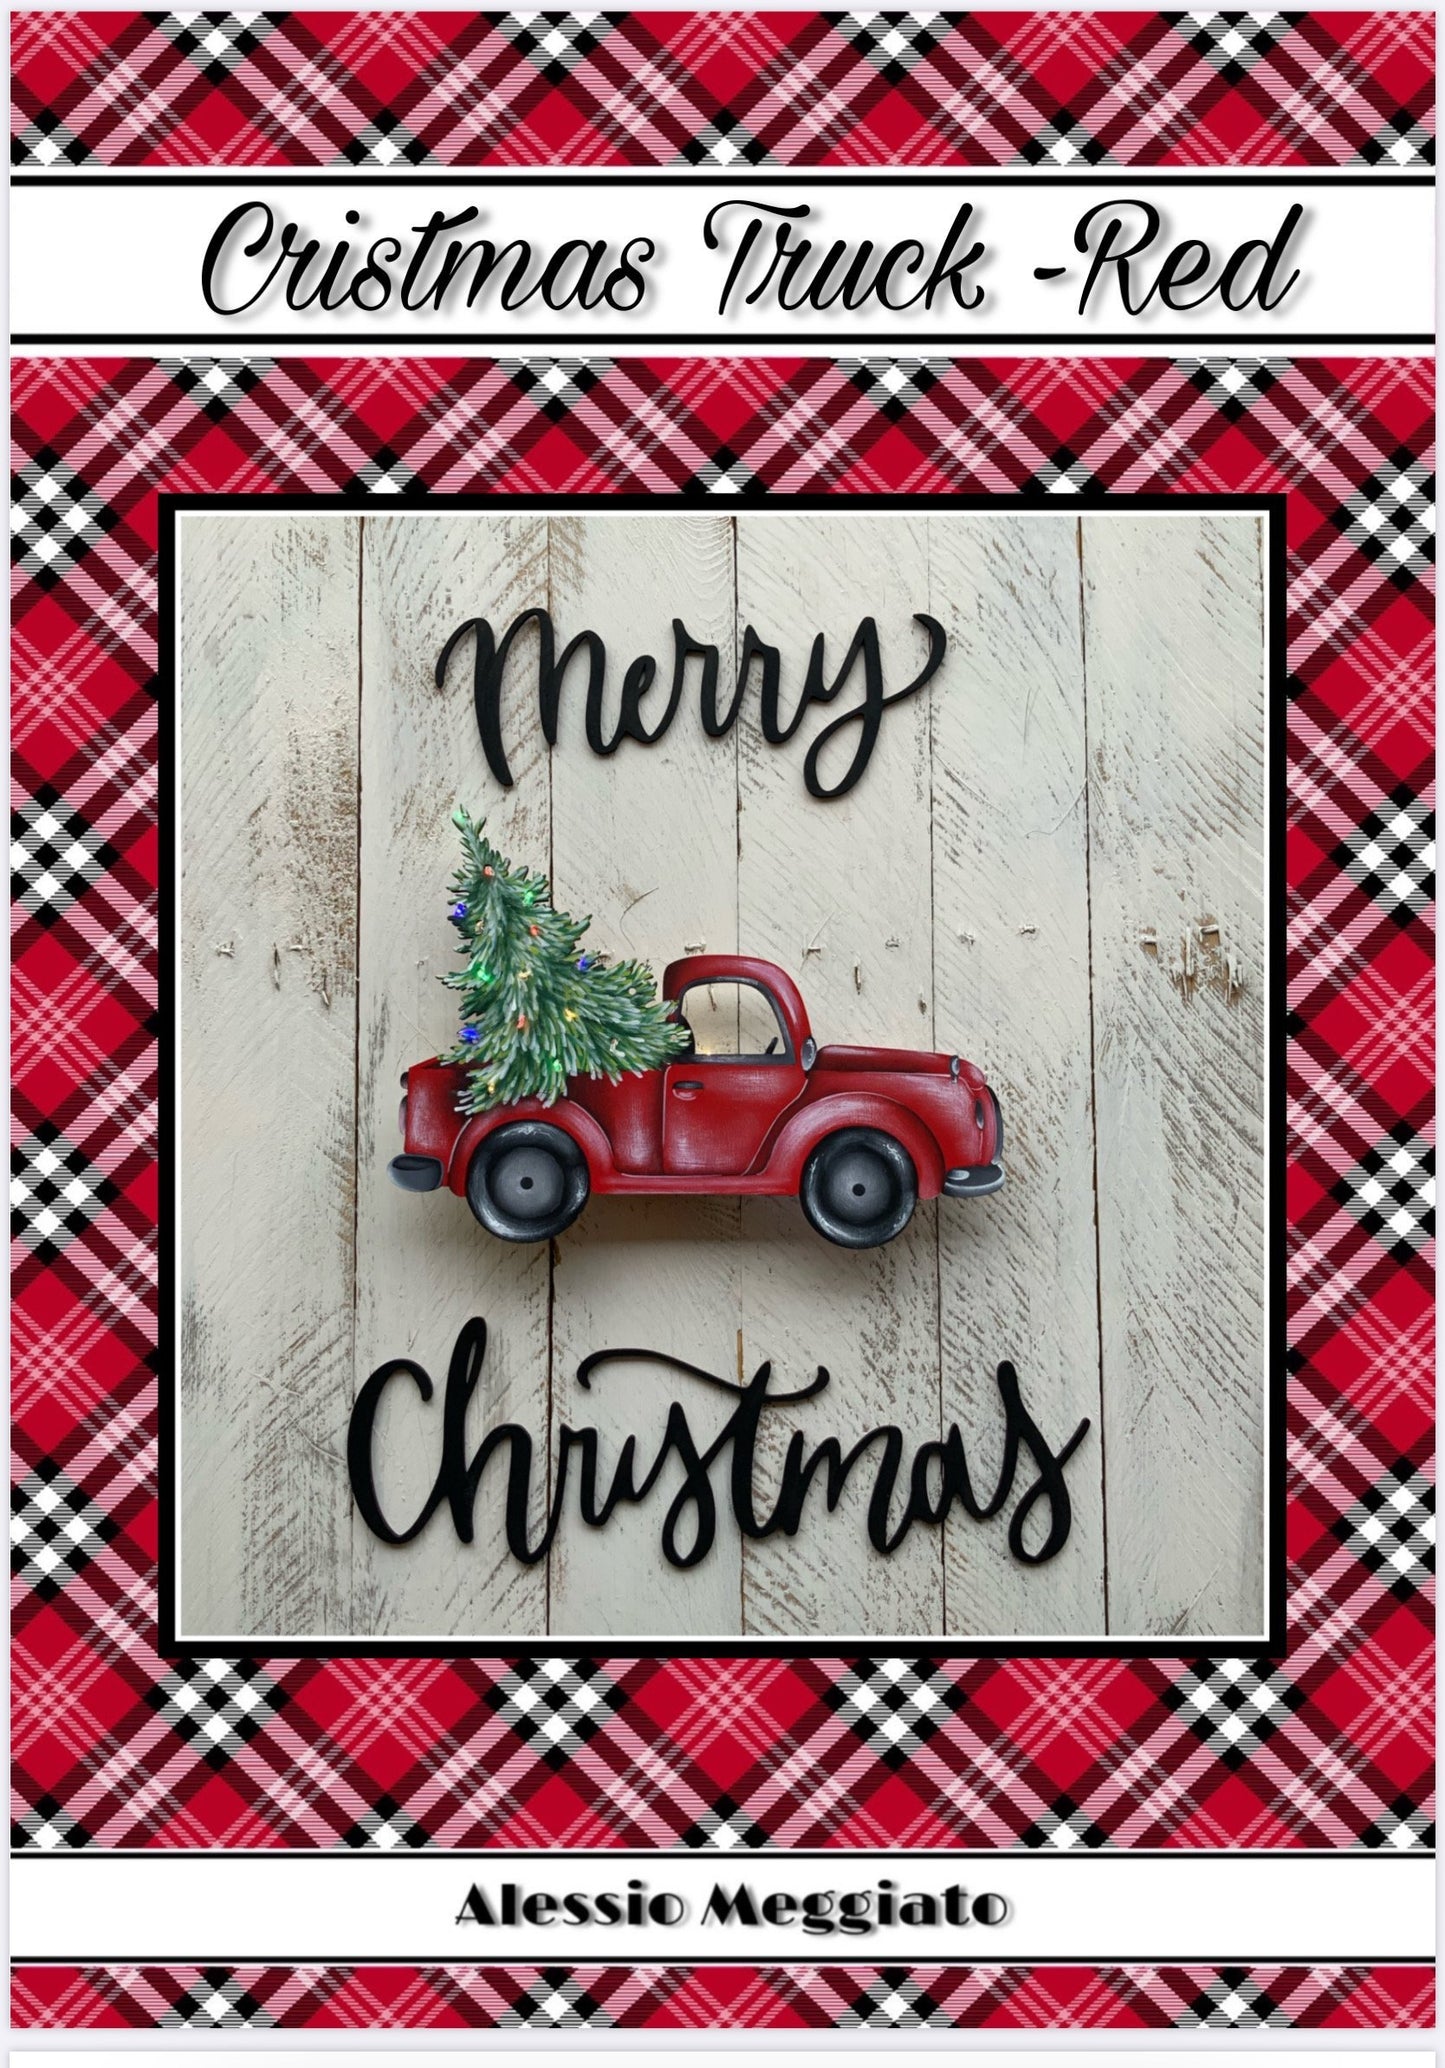 E-pattern Christmas Truck-Red ( italiano) - Out of the Wood